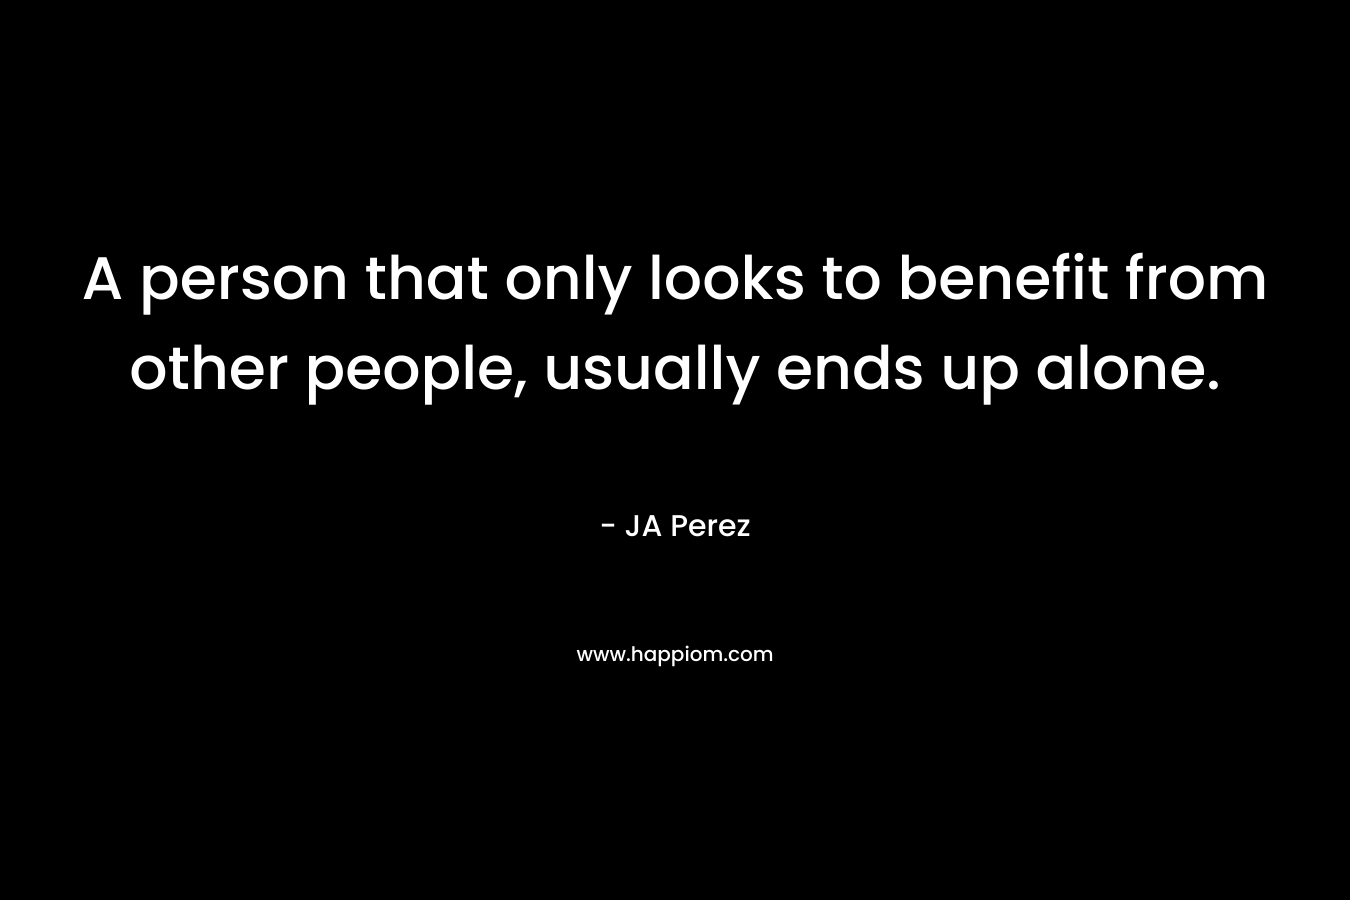 A person that only looks to benefit from other people, usually ends up alone.